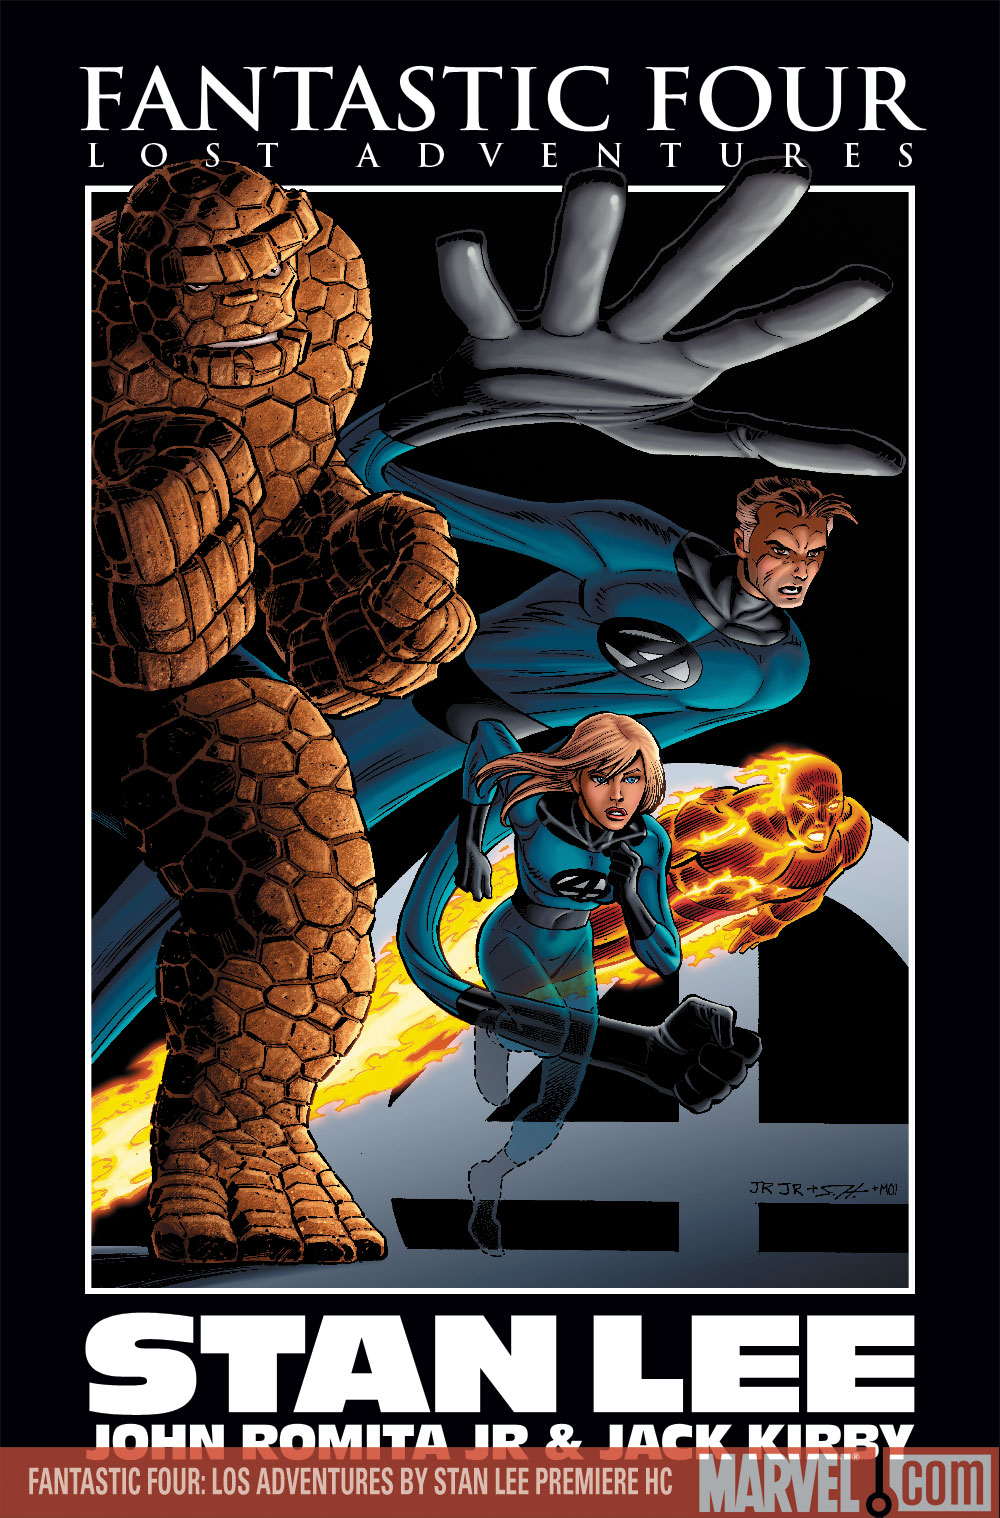 Fantastic Four Lost Adventures by Stan Lee Premiere (Hardcover)